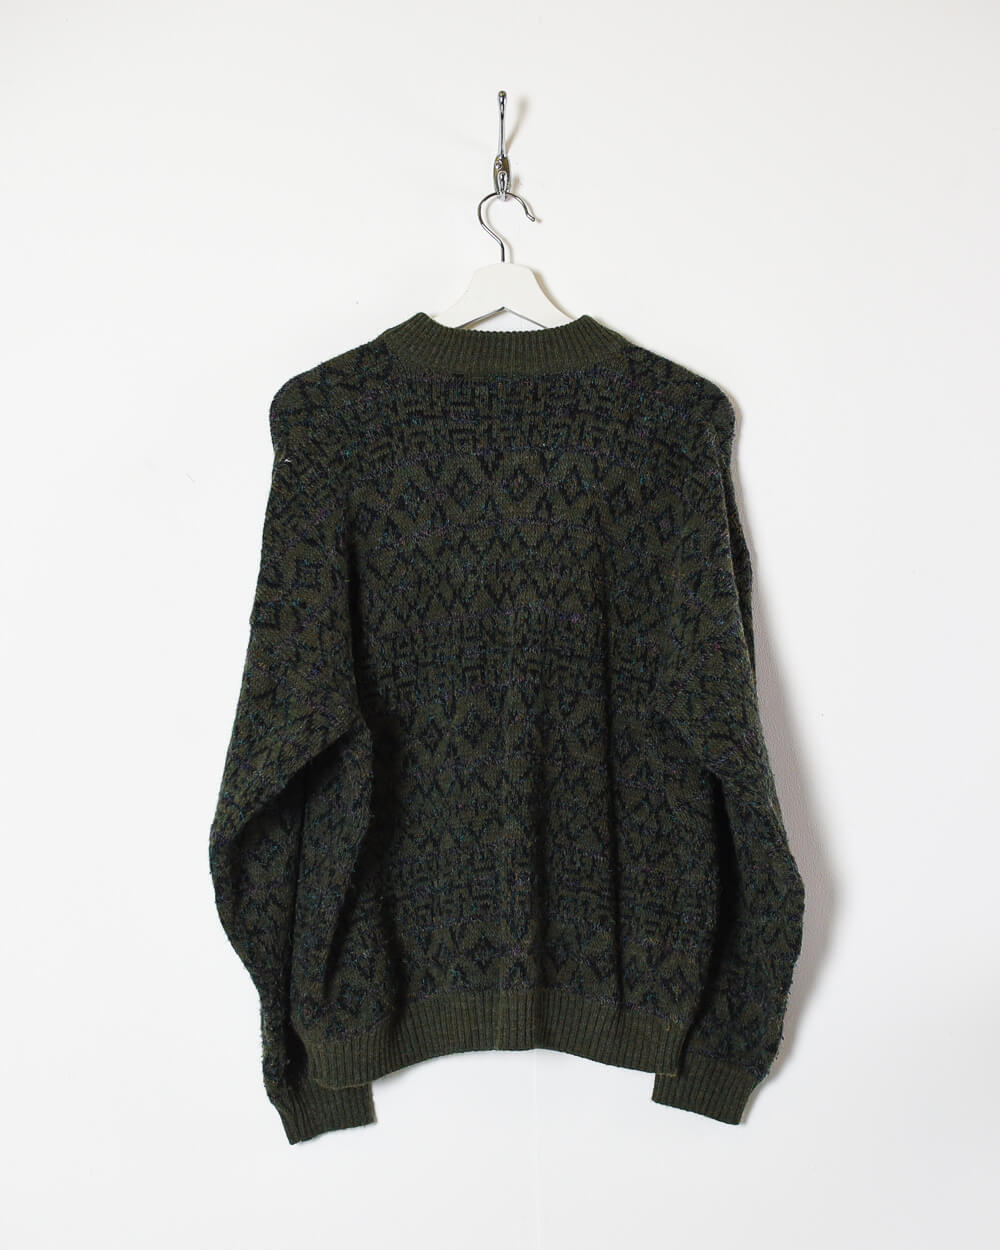 Green Vintage Knitted Button Up Sweatshirt - Large